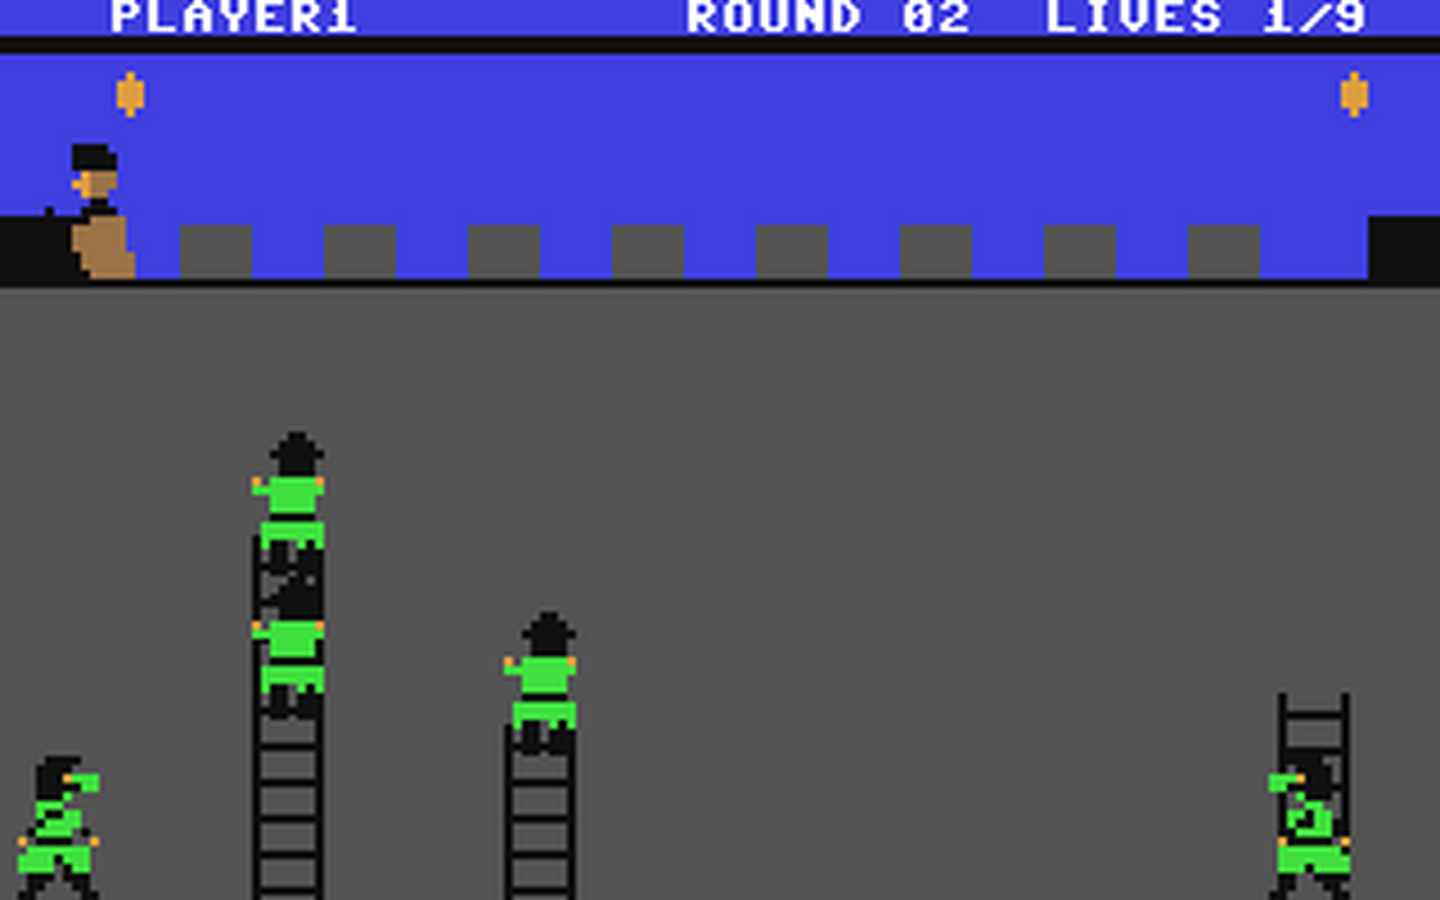 C64 GameBase Orc_Attack Creative_Sparks_[Thorn_Emi_Computer_Software] 1984